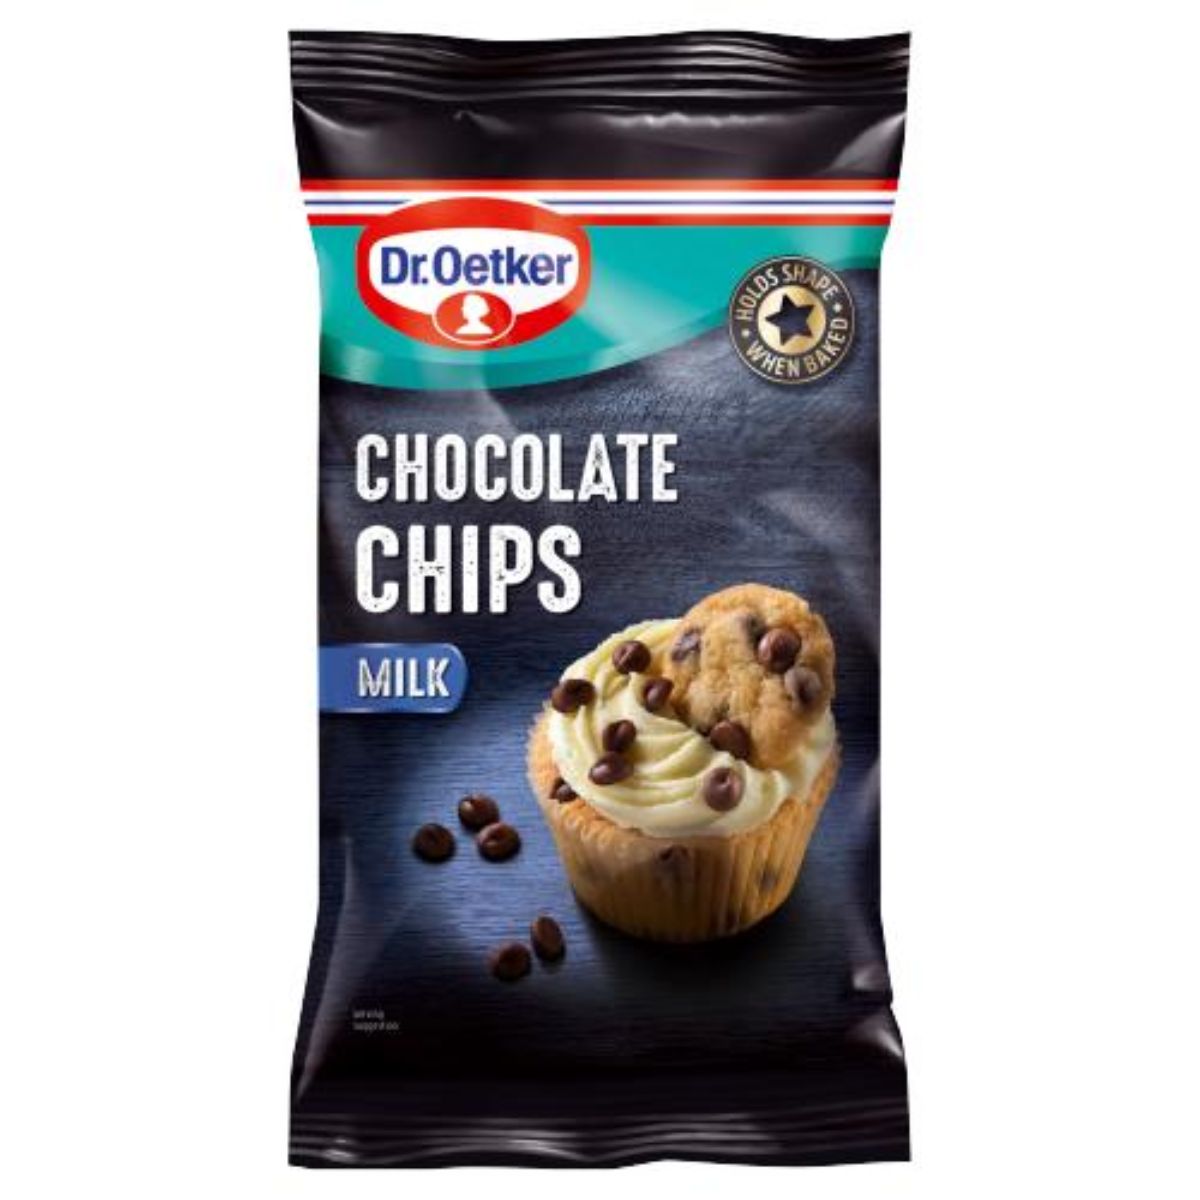 A bag of Dr. Oetker - Chocolate Chips Milk - 100g on a white background.